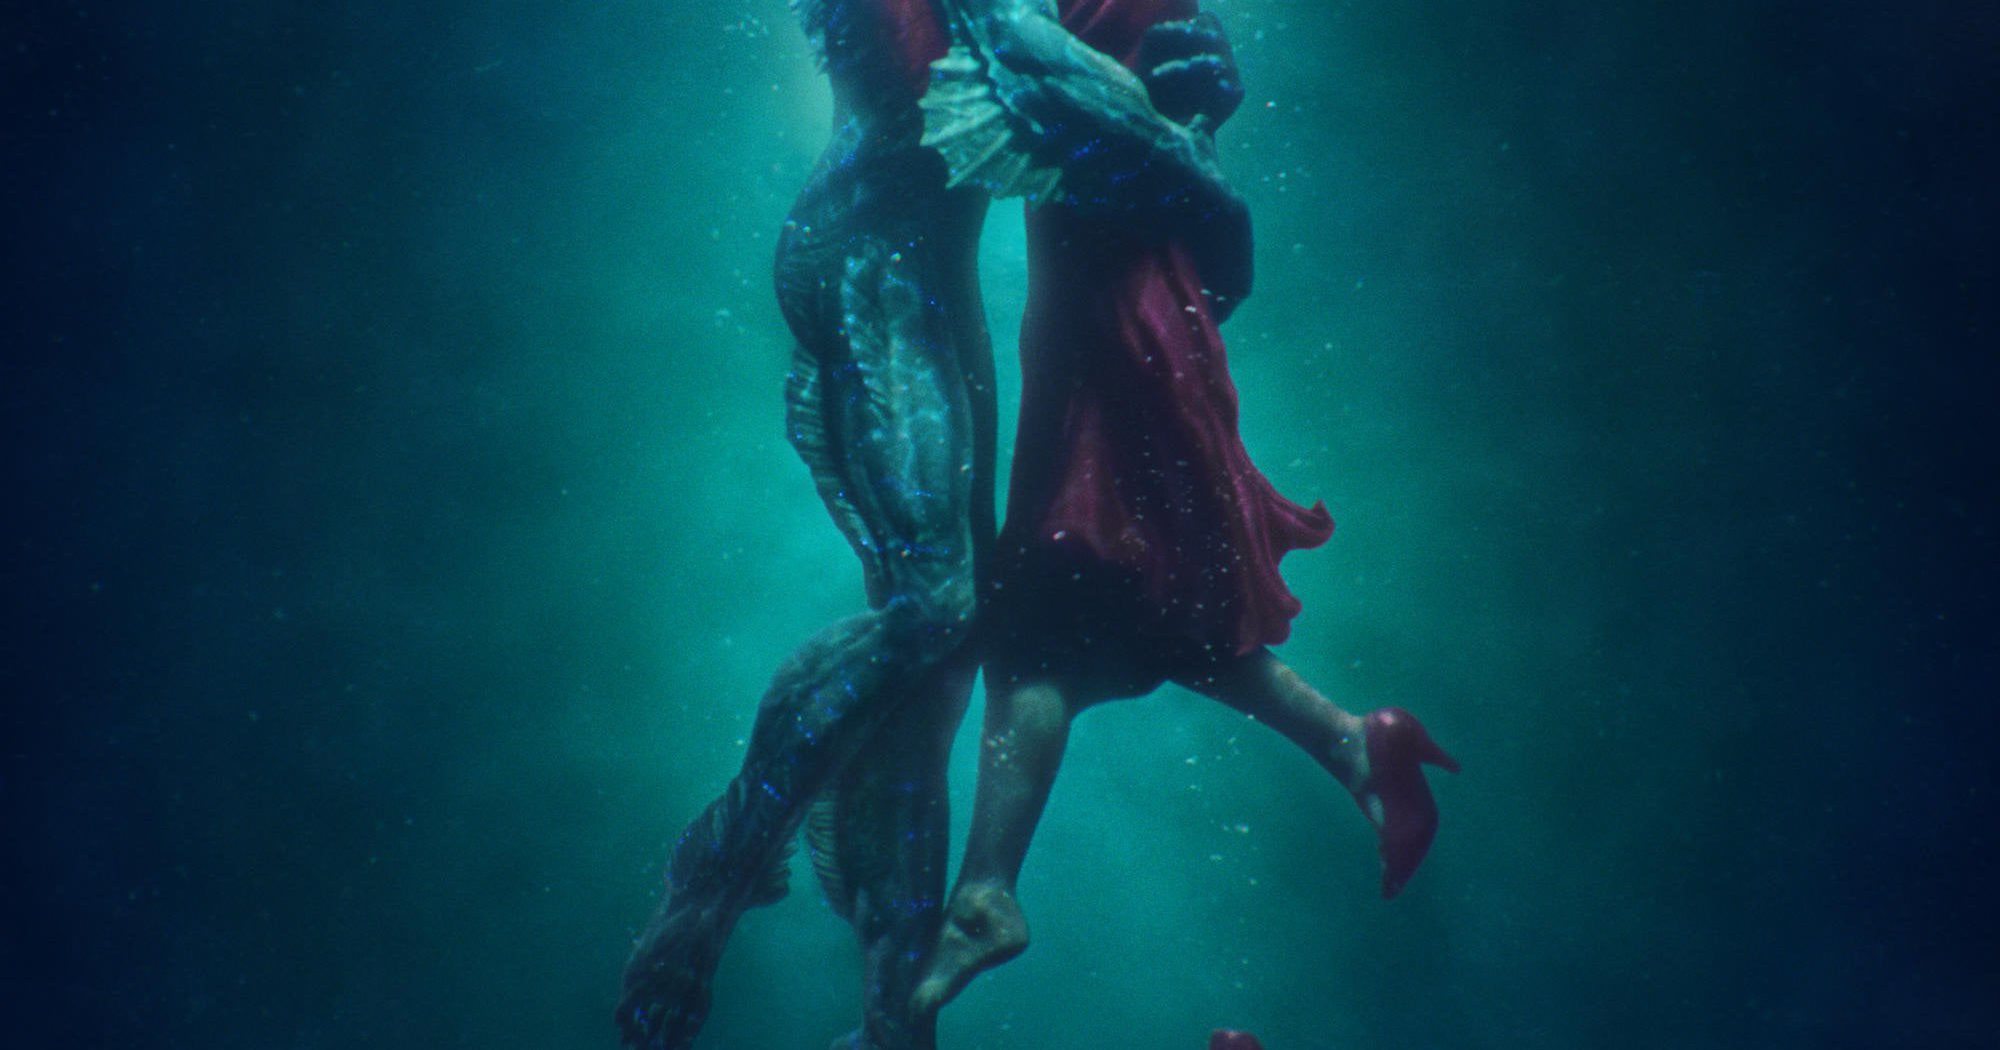 Poster for the movie "The Shape of Water"